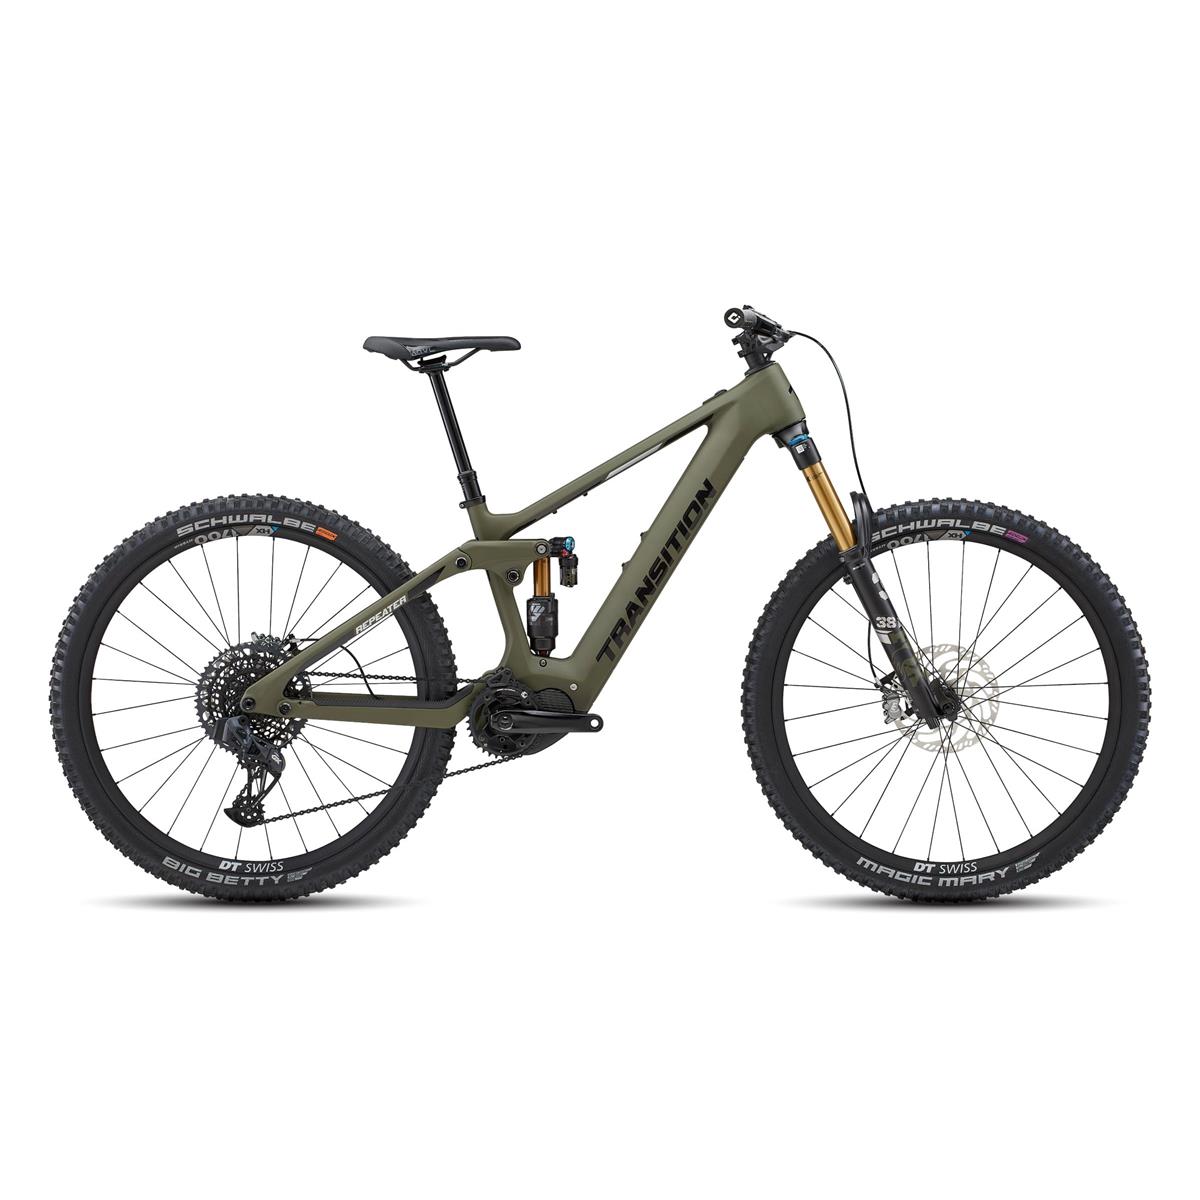 Repetidor Carbono AXS 29'' 160mm 12s 630Wh Shimano EP8 Mossy Green Talla L